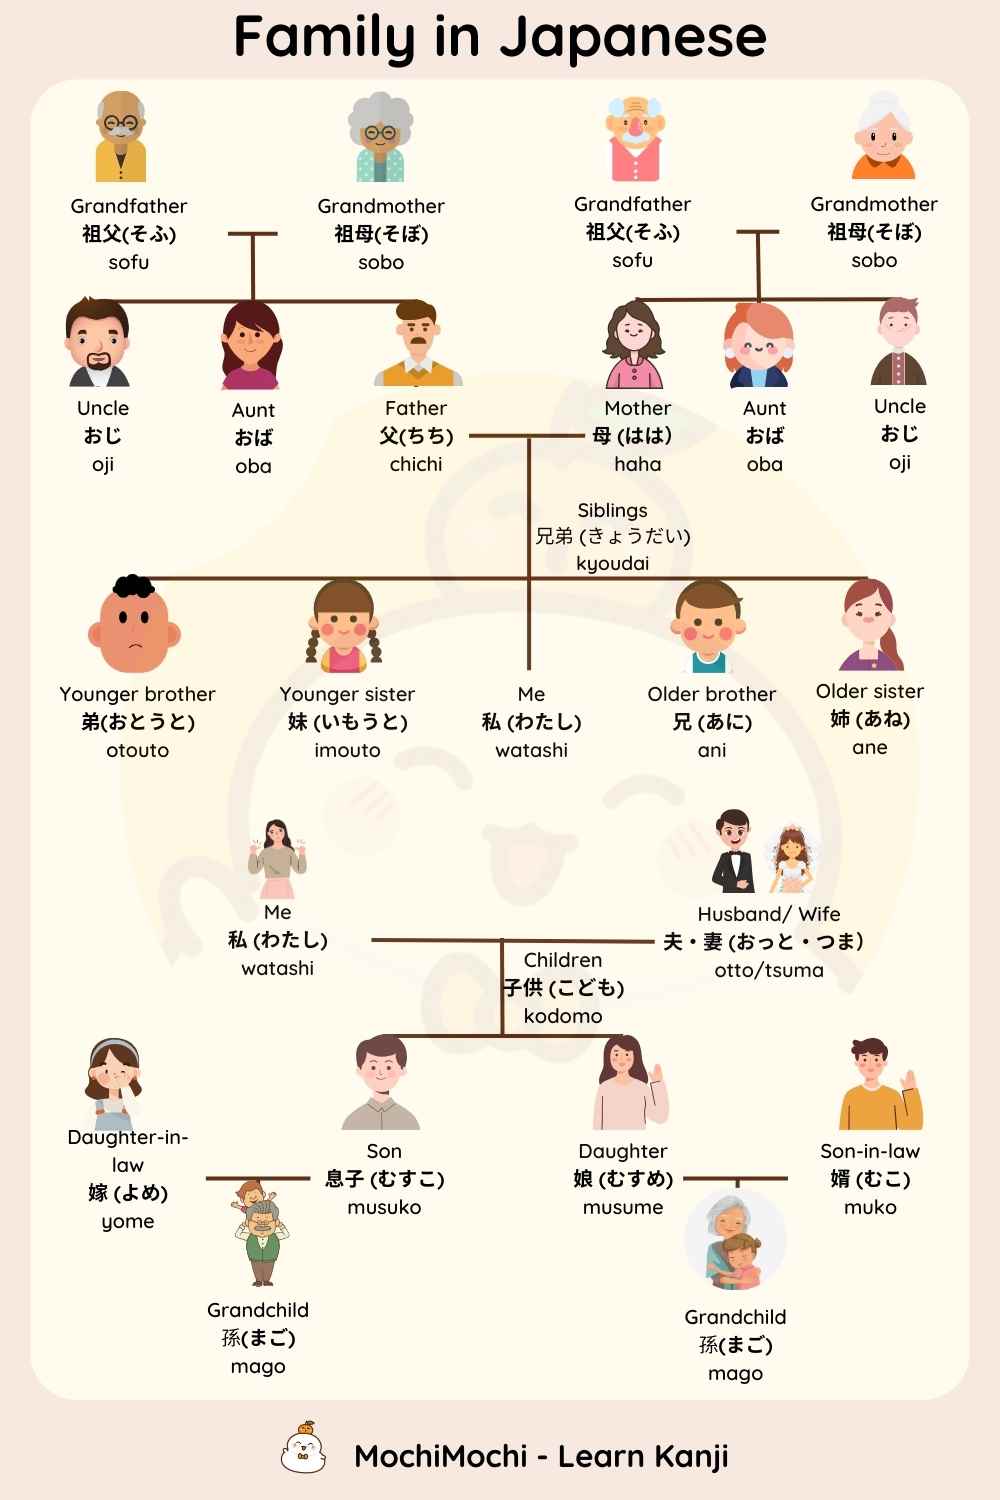 “Family” in Japanese: Learn about family-related vocabulary in Japanese